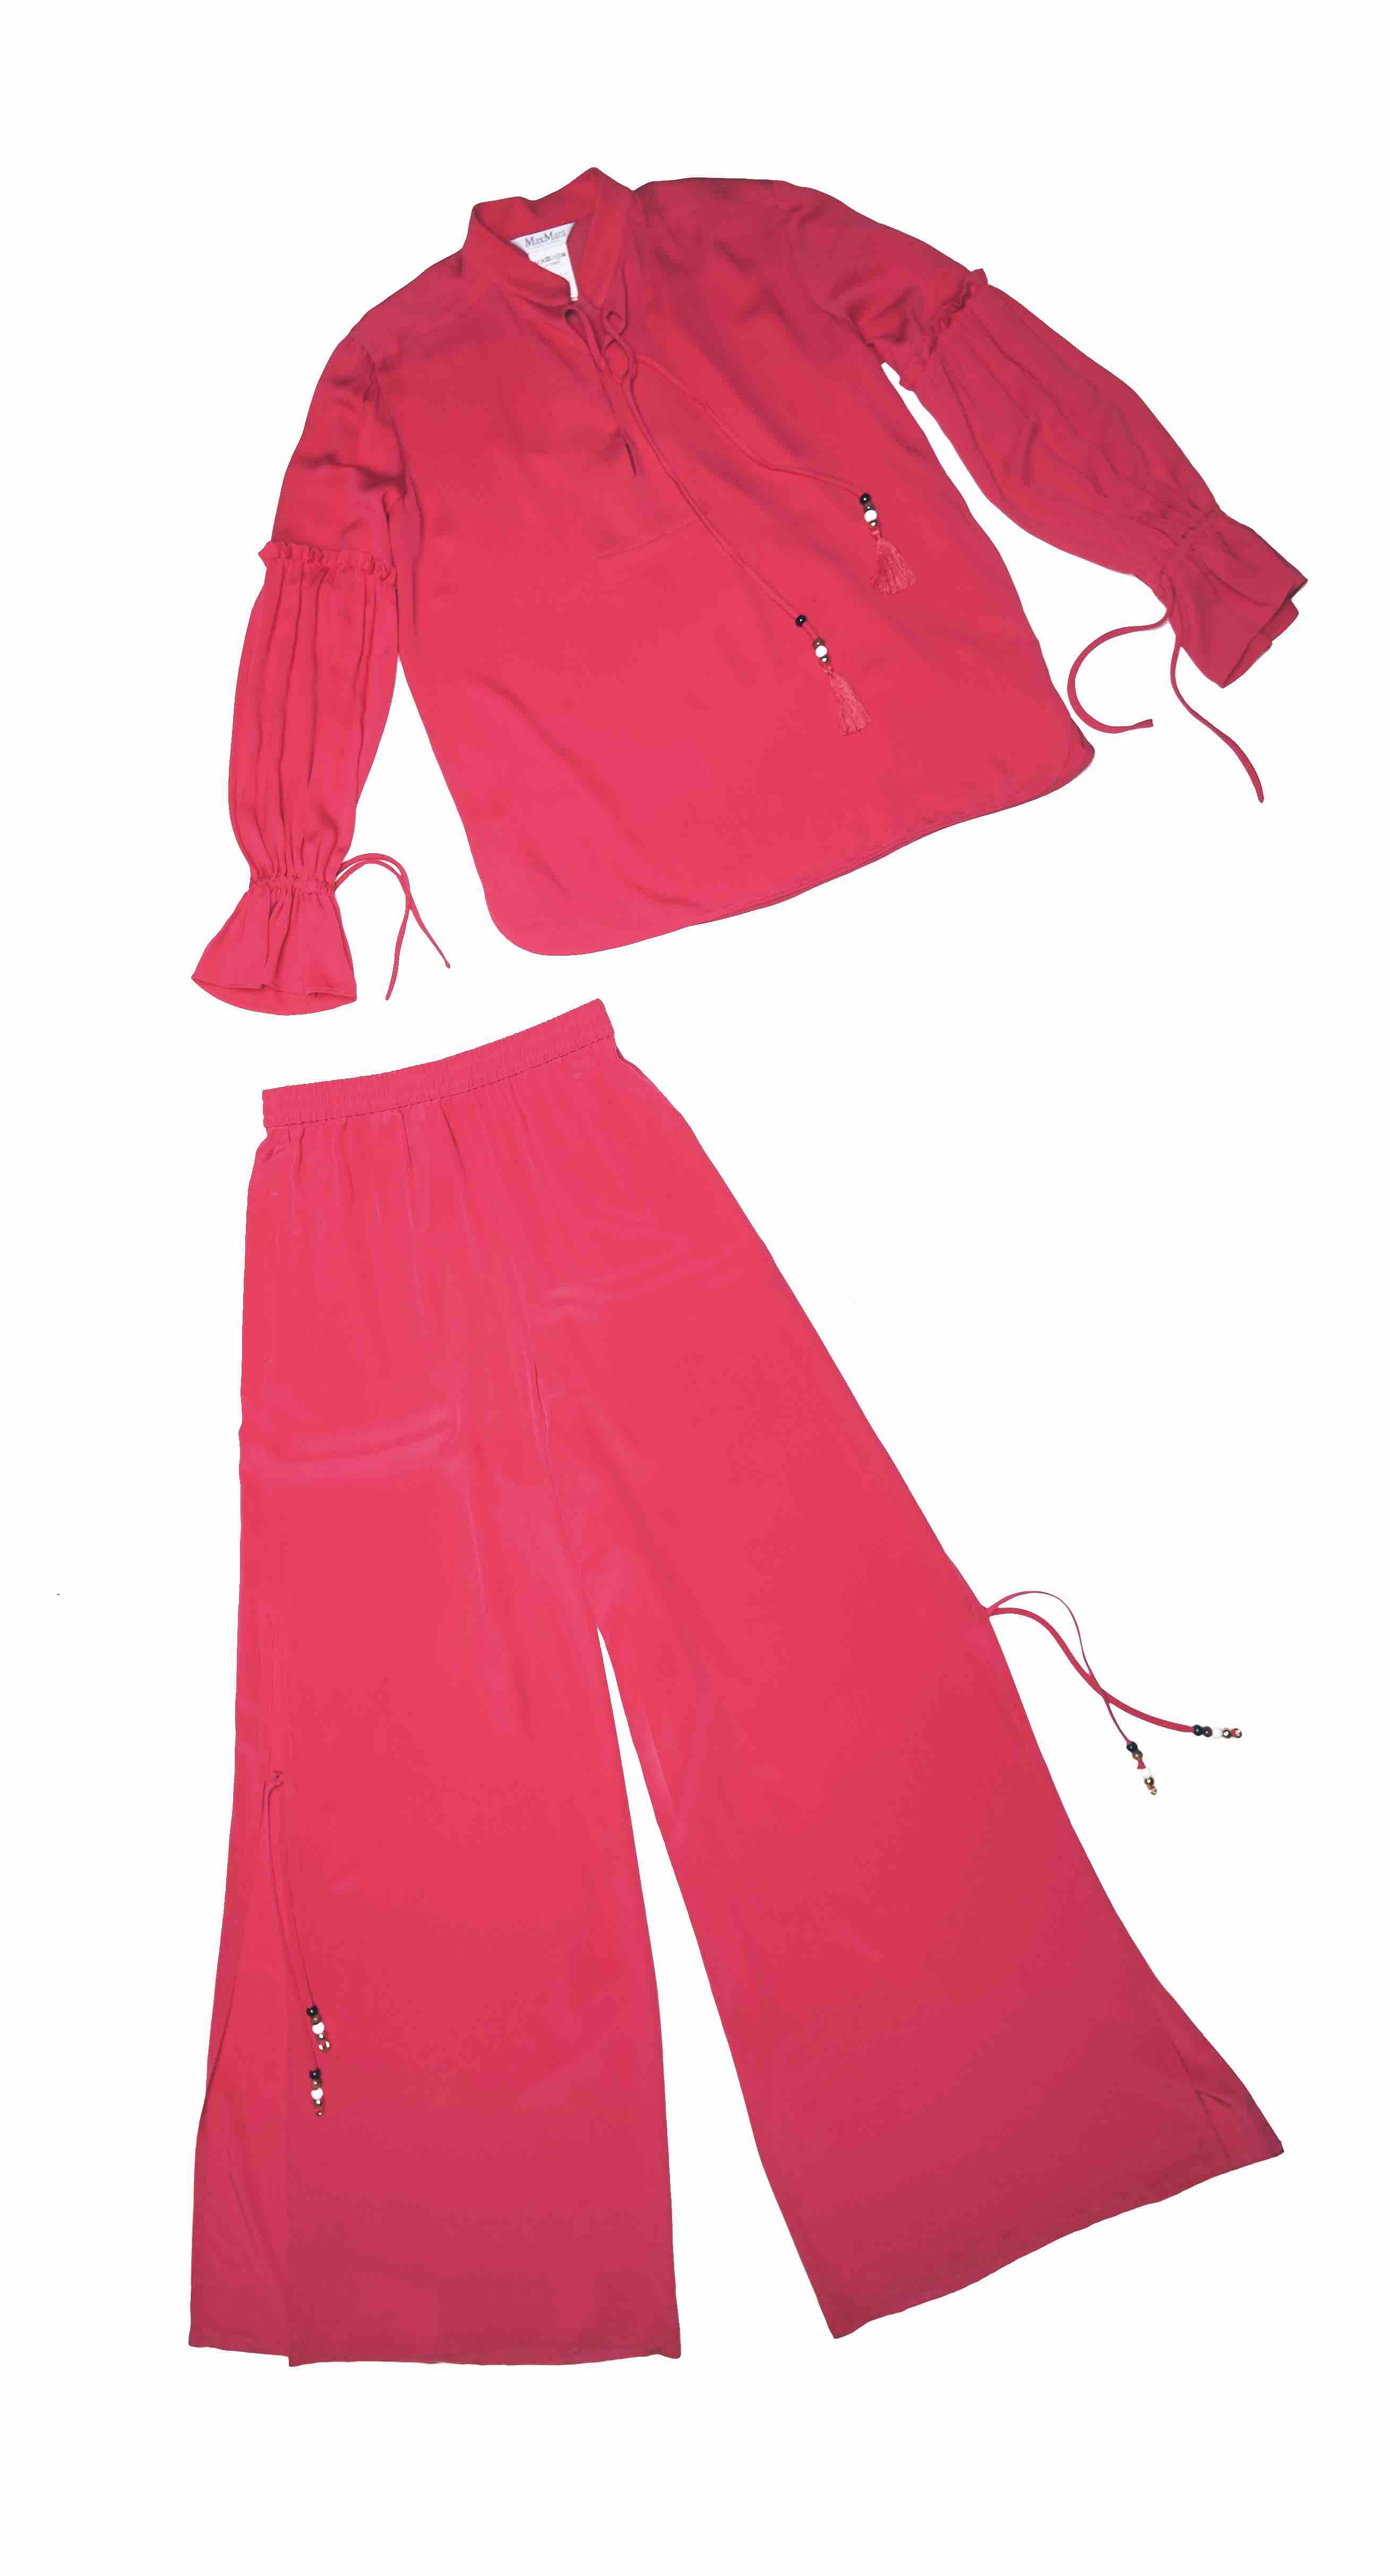 Silk charmeuse blouse and crepe de chine trousers, from Max Mara.